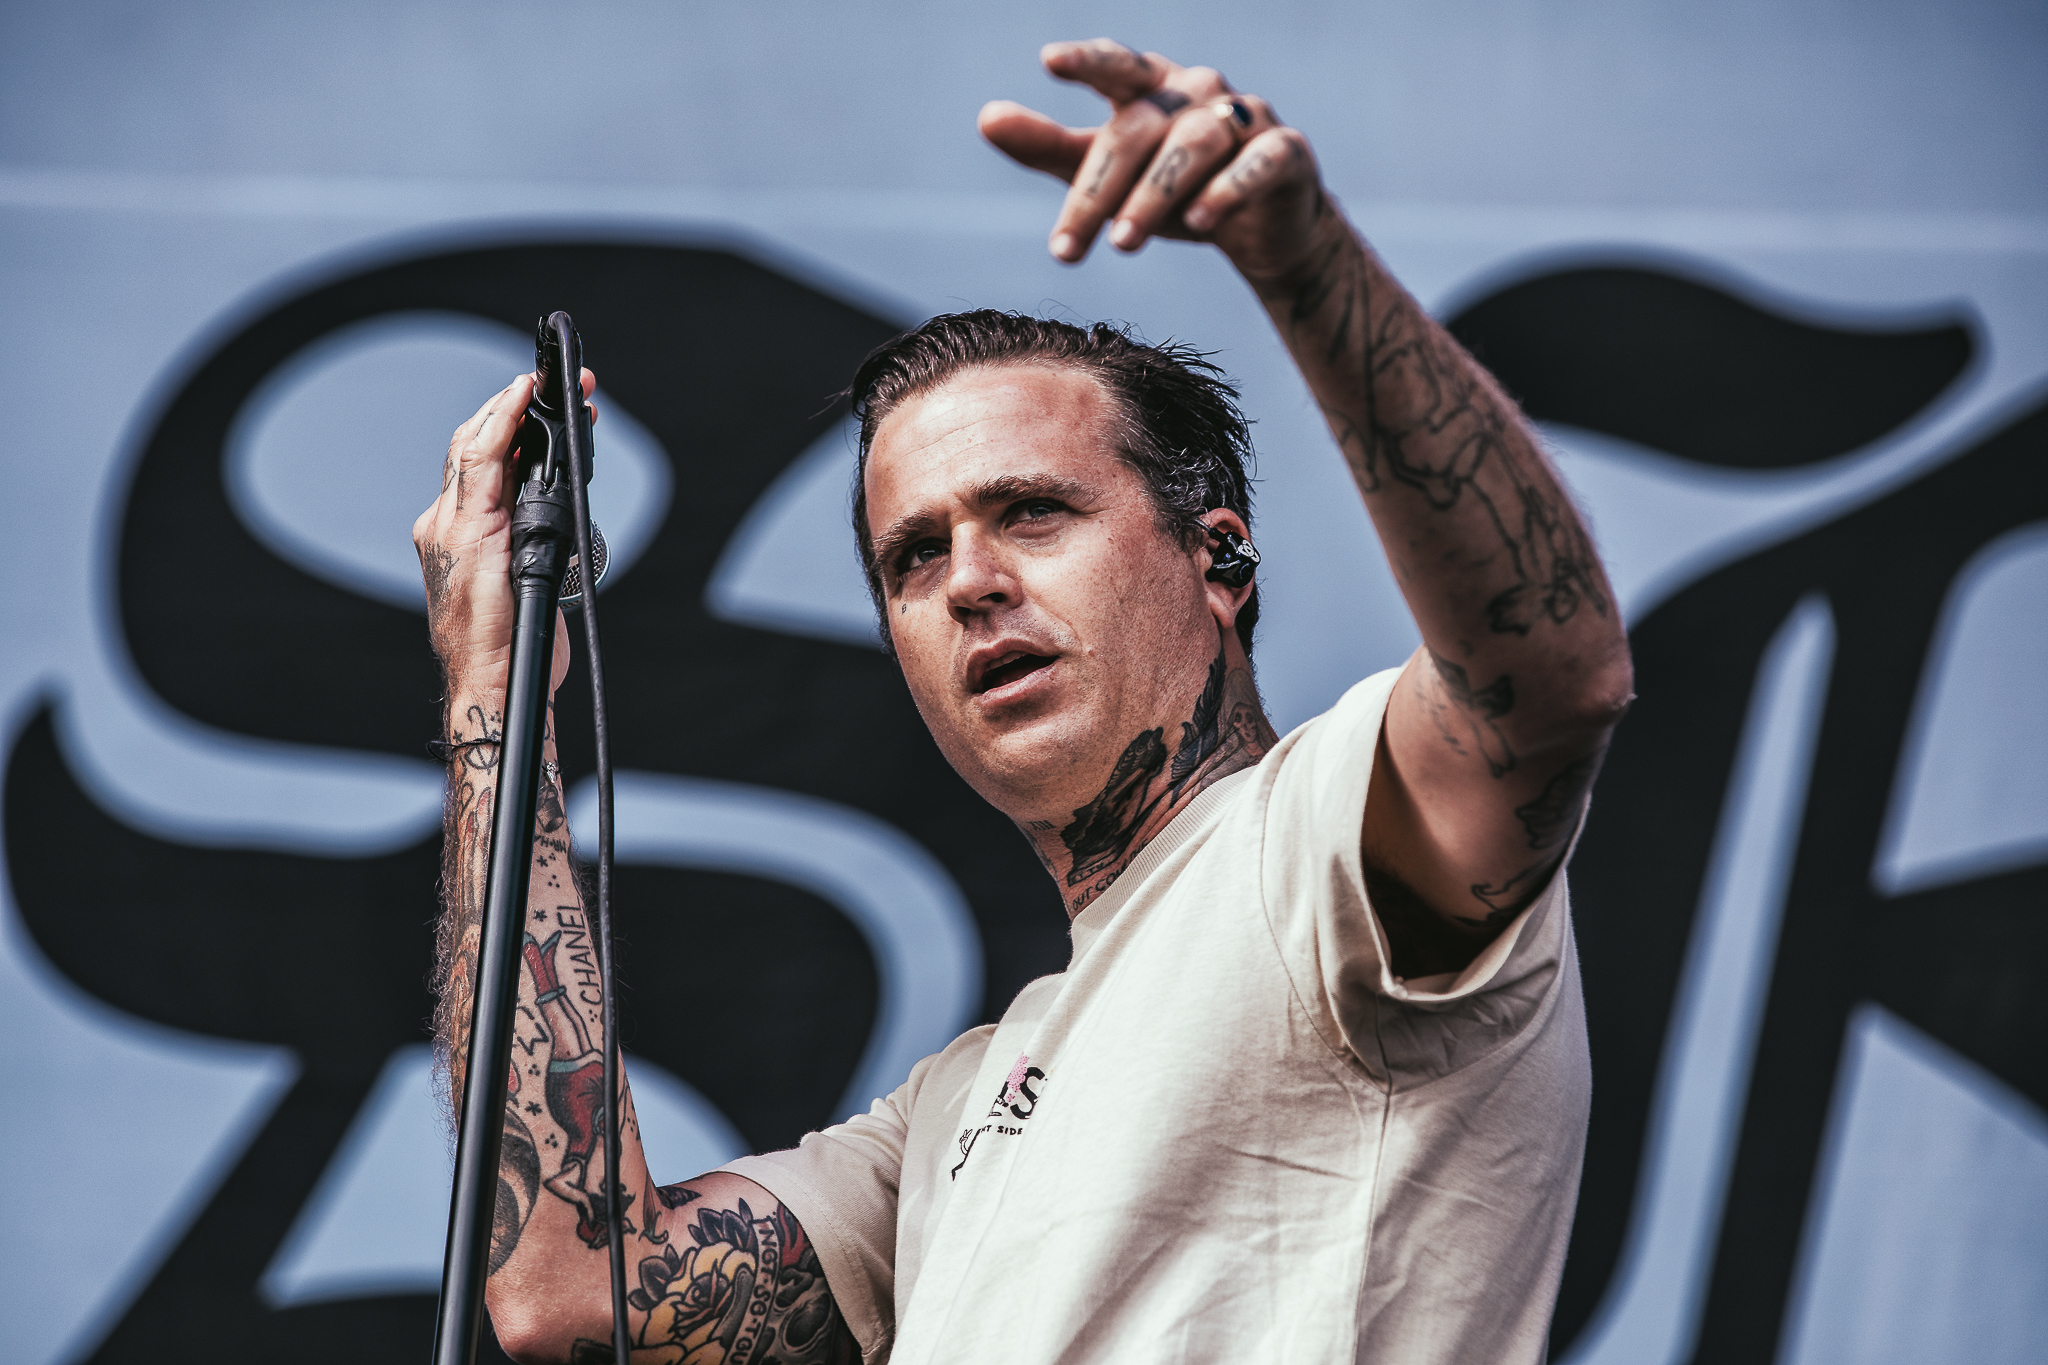 The_Amith_Affliction_Download110319_Nathan- (2).JPG